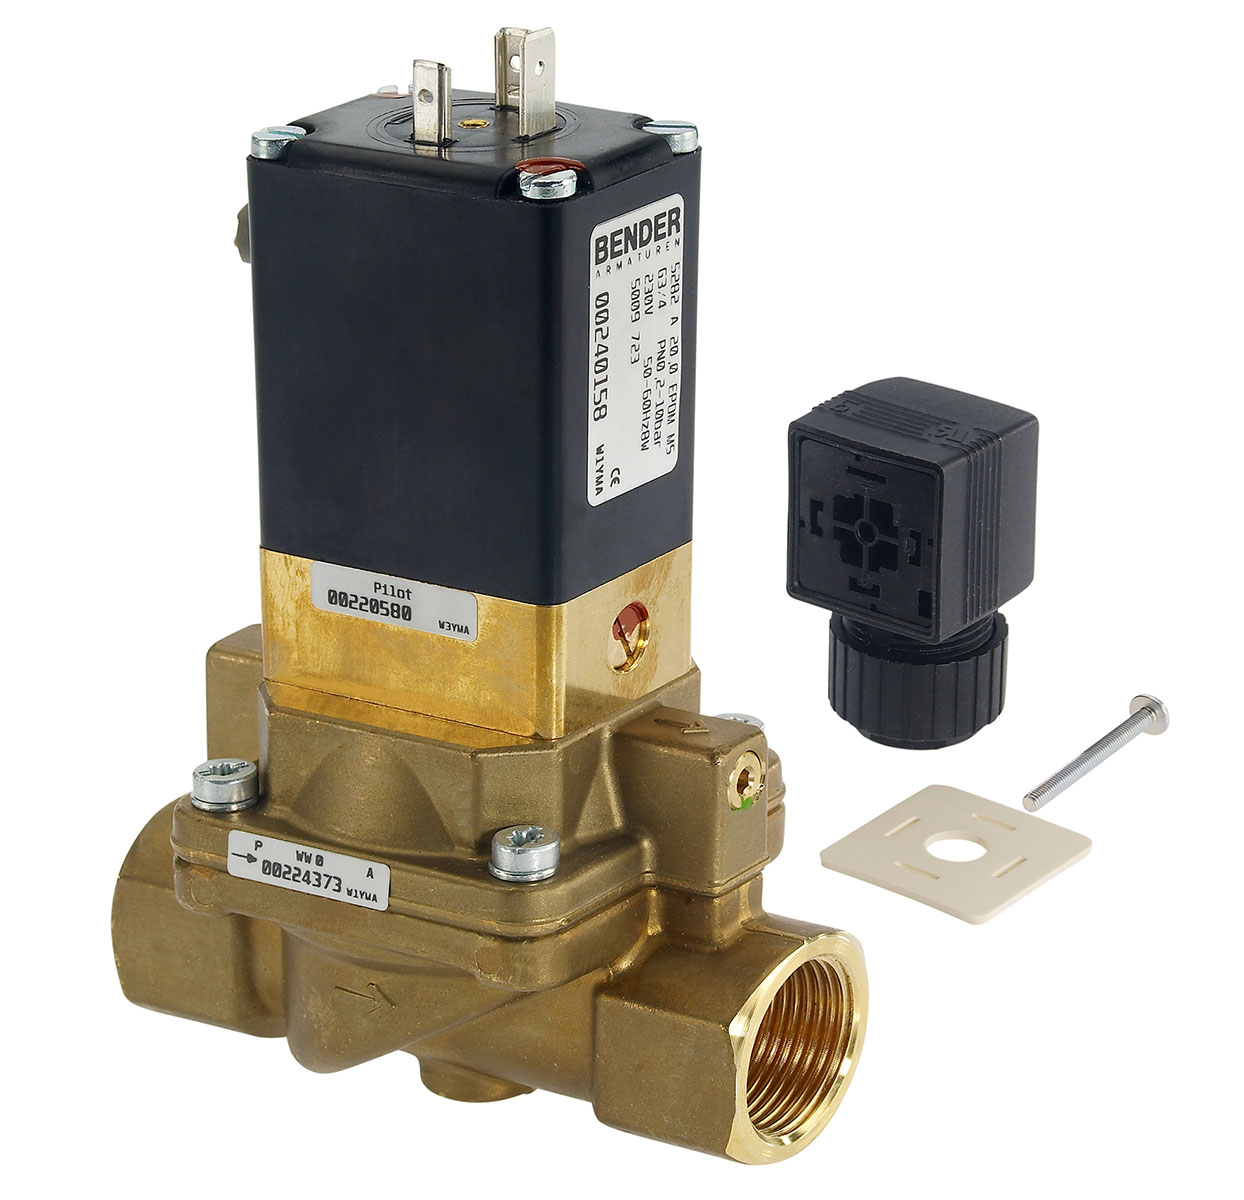 5009733 - 2/2 way solenoid valve normally closed for lightly soiled fluids Type 7; female thread